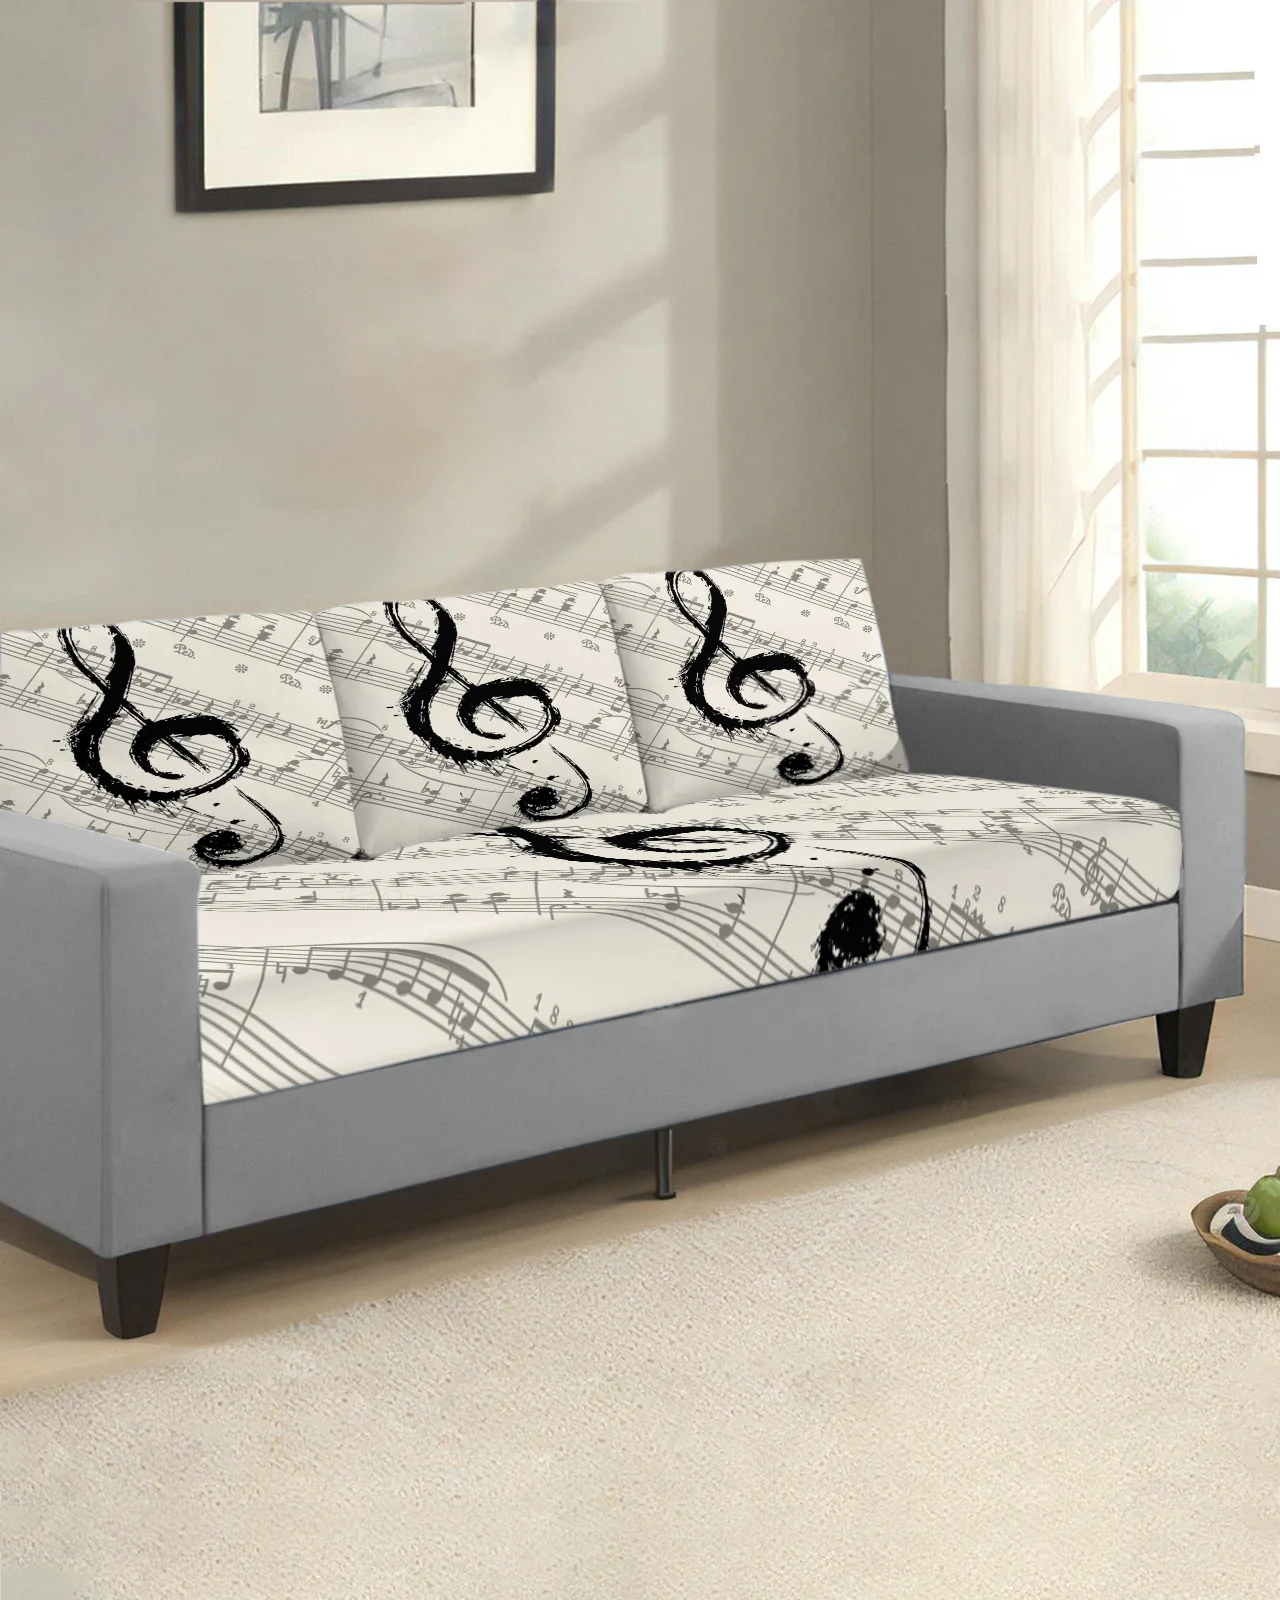 Sofa Seat Cover Living Room, Covers Musical Notes, Stretch Sofa Cover